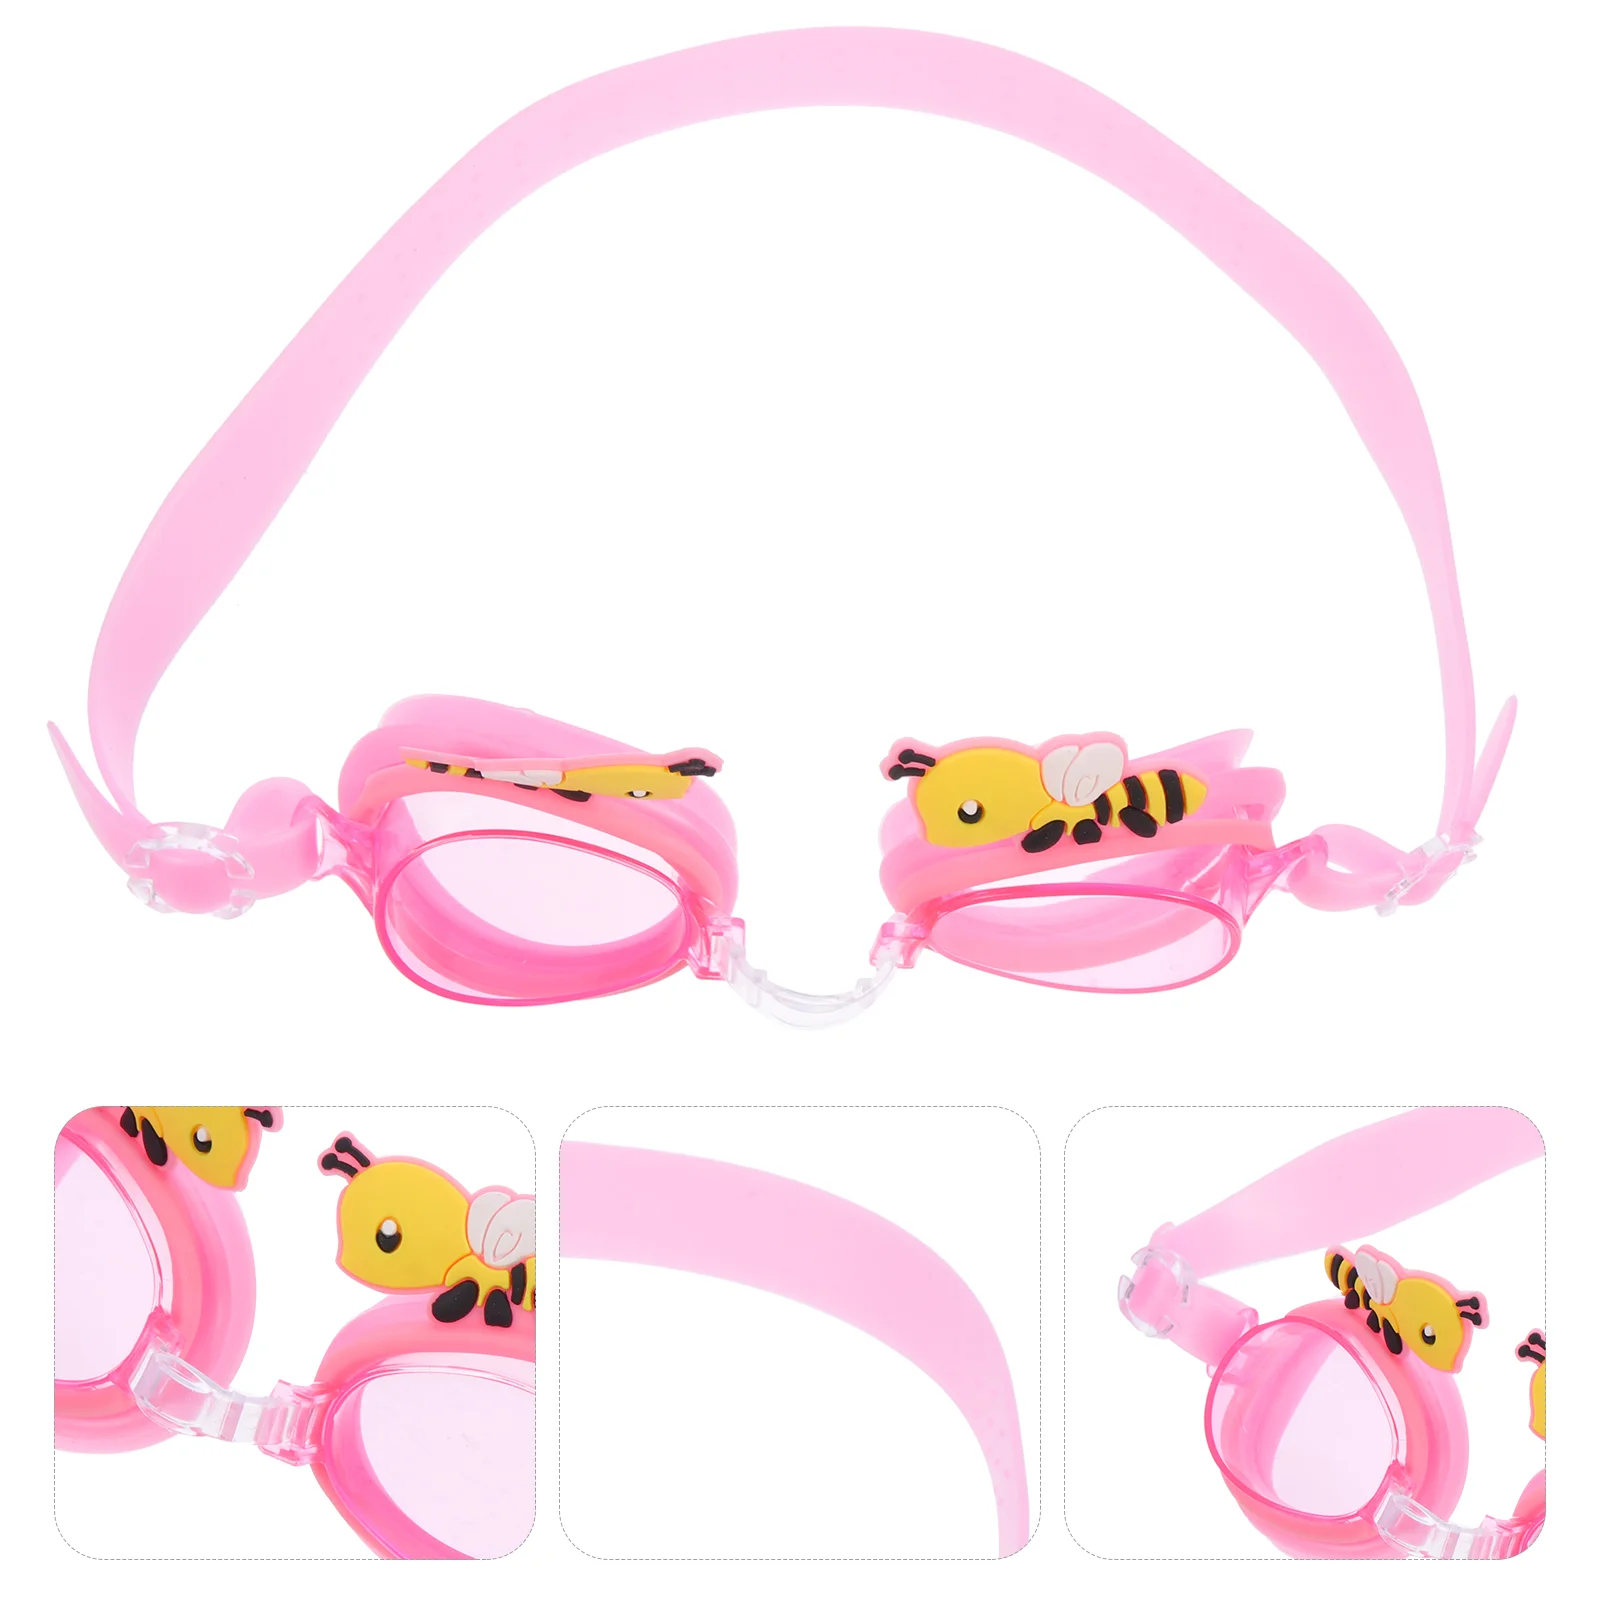 Bee Swimming Goggles Swimming Goggless for Toddlers Cartoon Universal Anti Fog Lightweight Kids Portable Silica Gel Supply hair curlers anti perm bag hair dryer portable silicone insulation pads blow anti scald silica gel pouch travel for tools